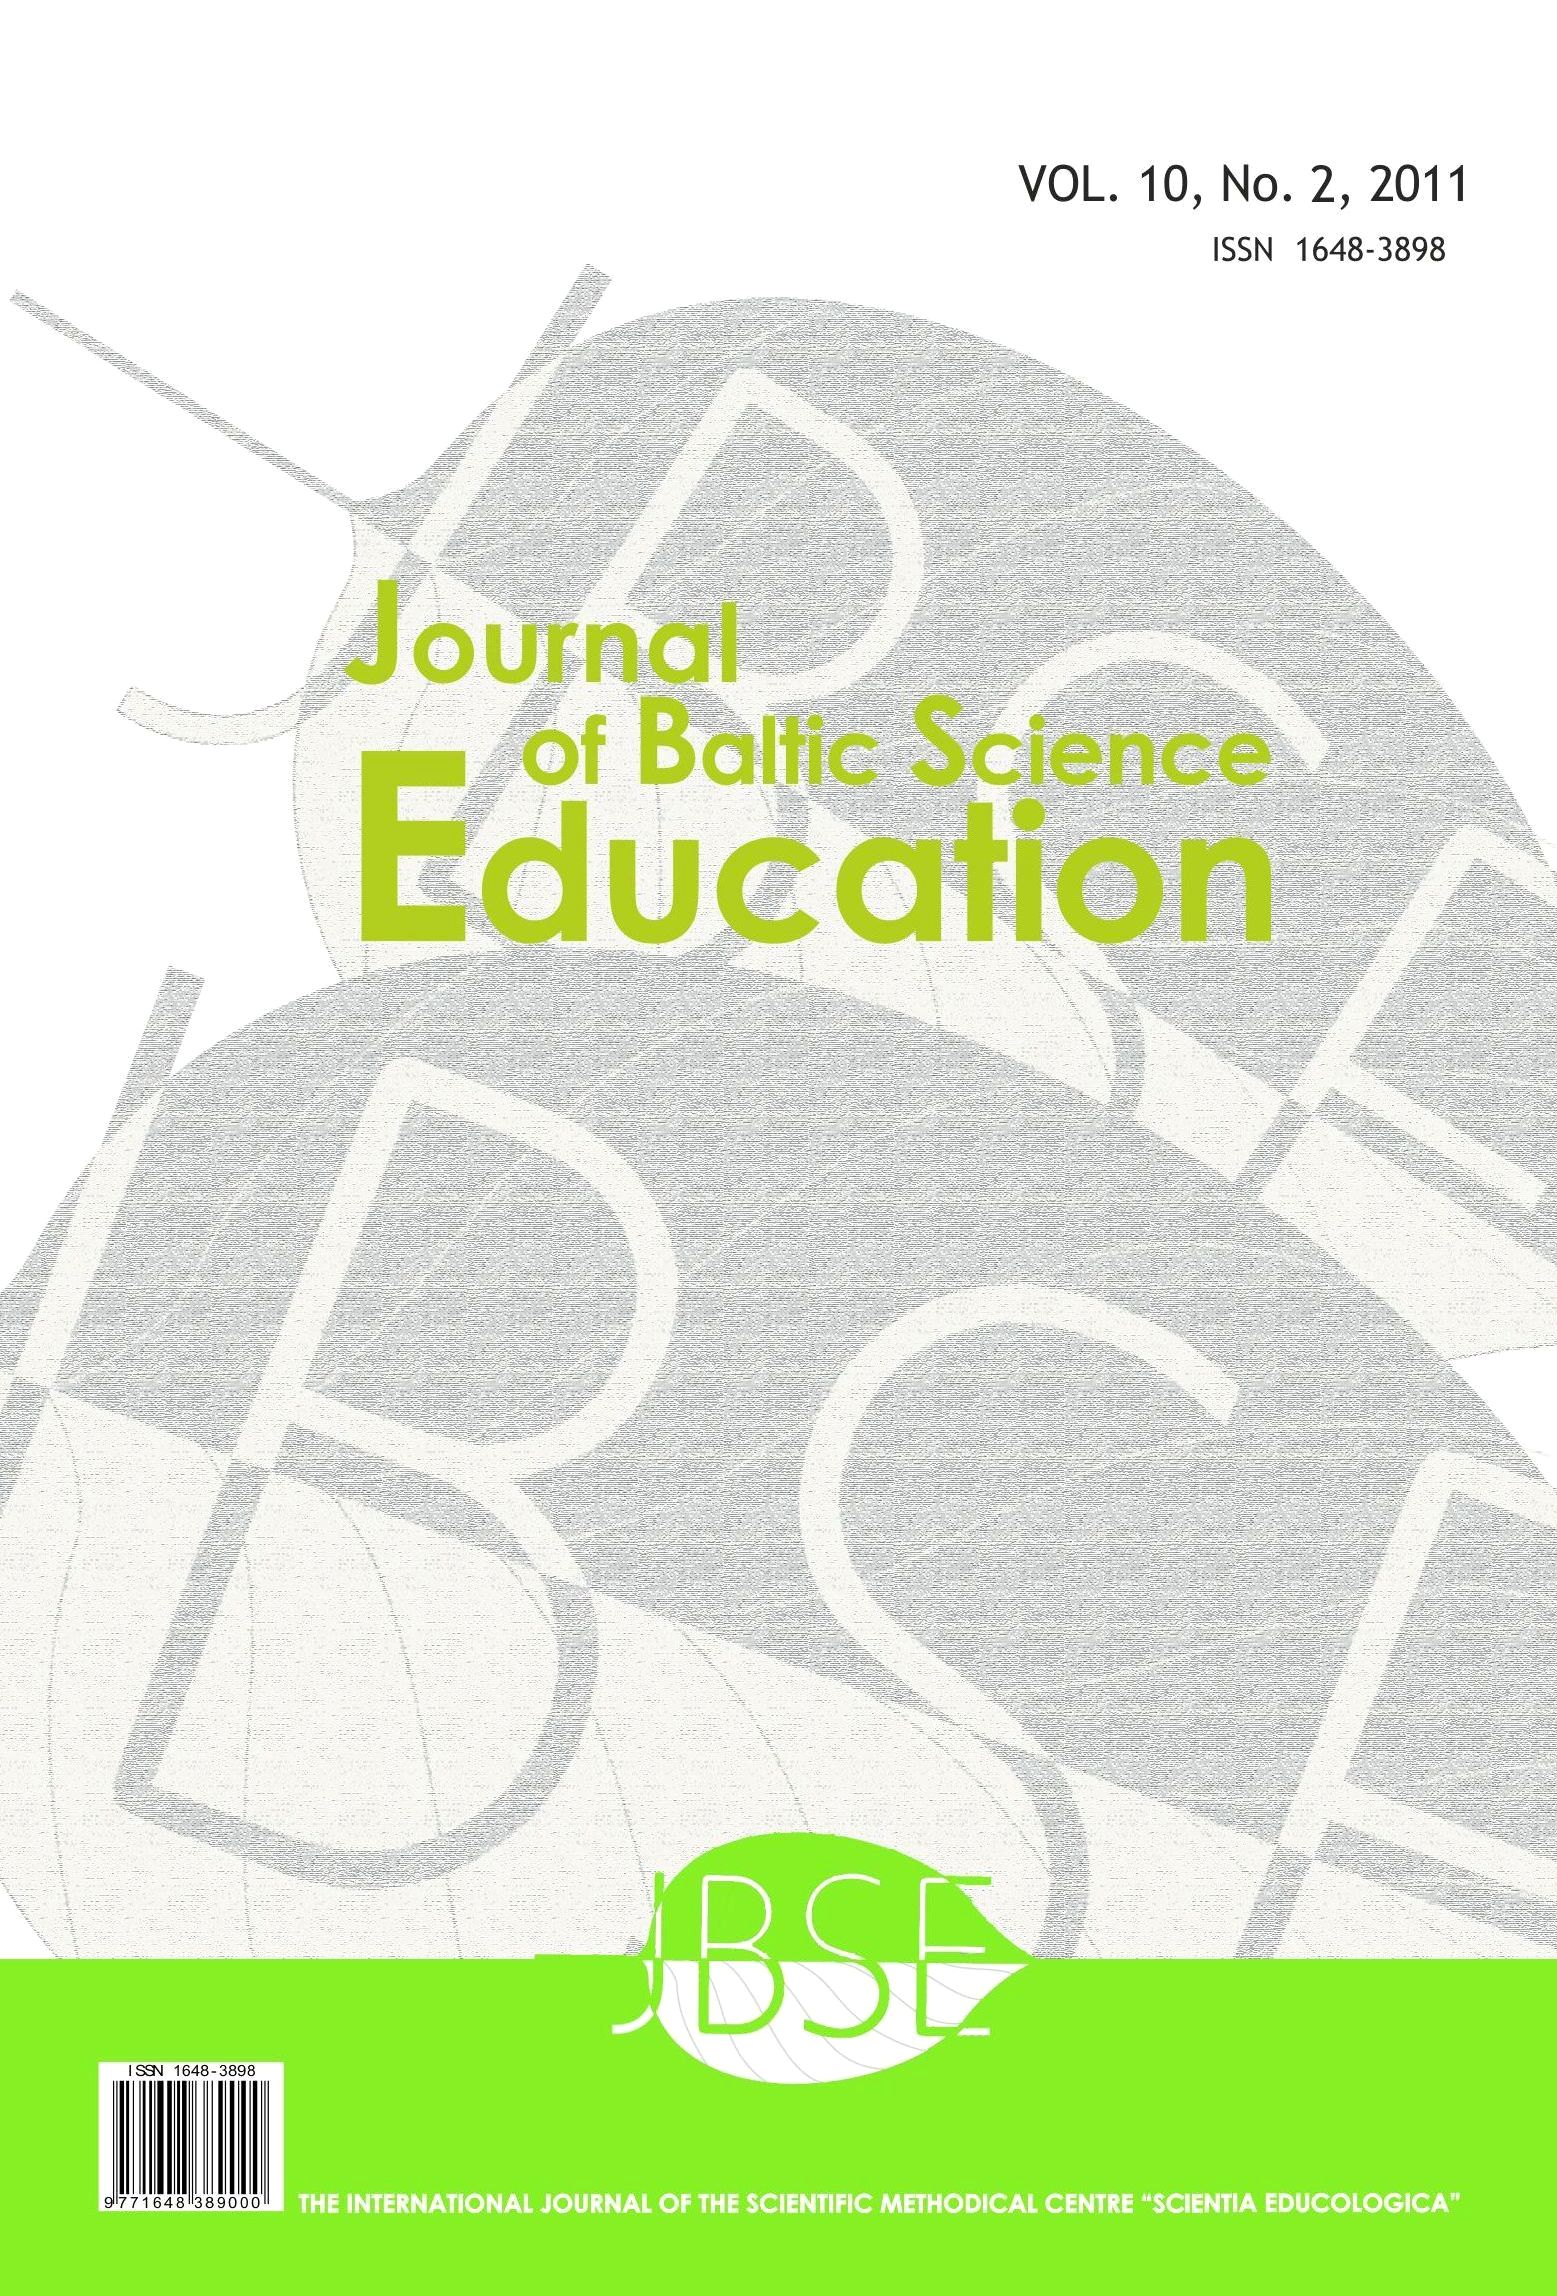 THE USE OF INFORMATION AND COMMUNICATION TECHNOLOGIES IN SCIENCE EDUCATION